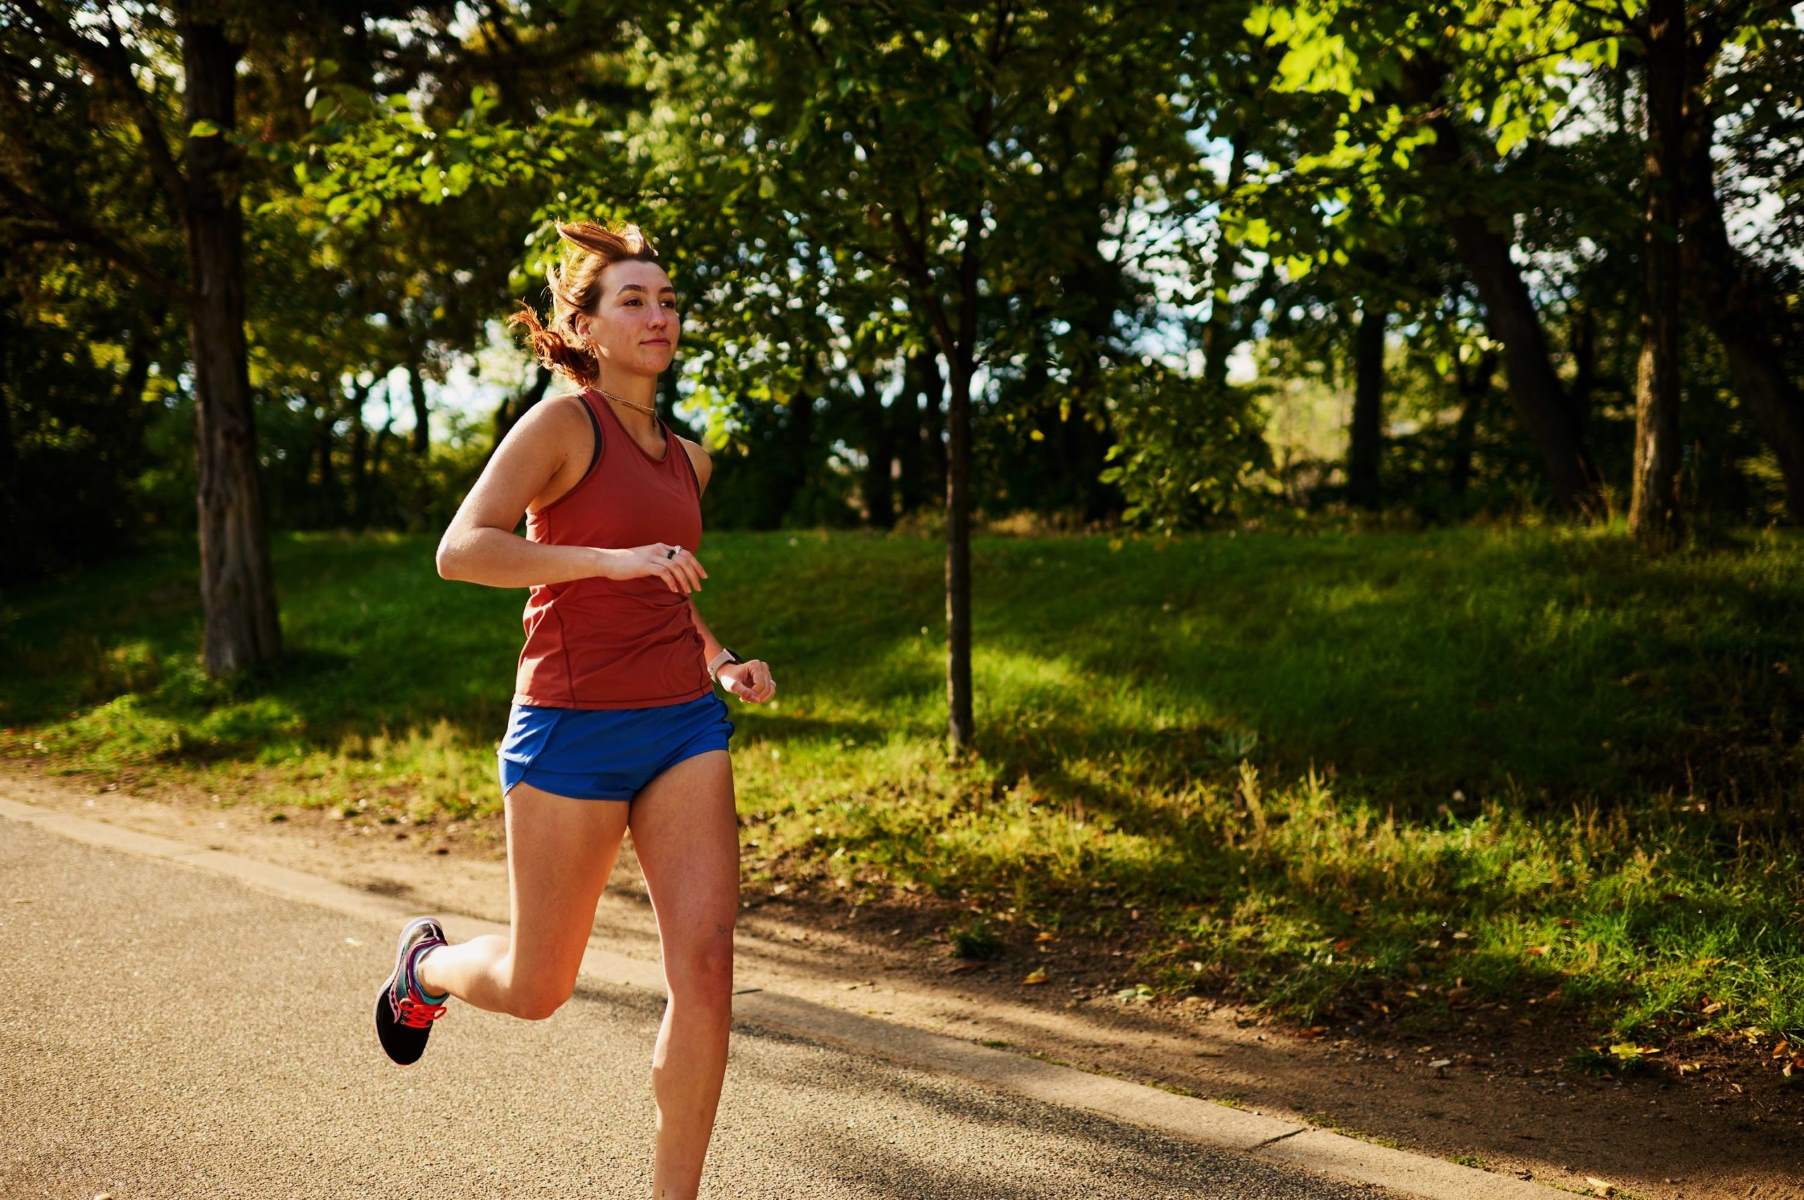 Three Recommended Speed Sessions For Beginner Runners